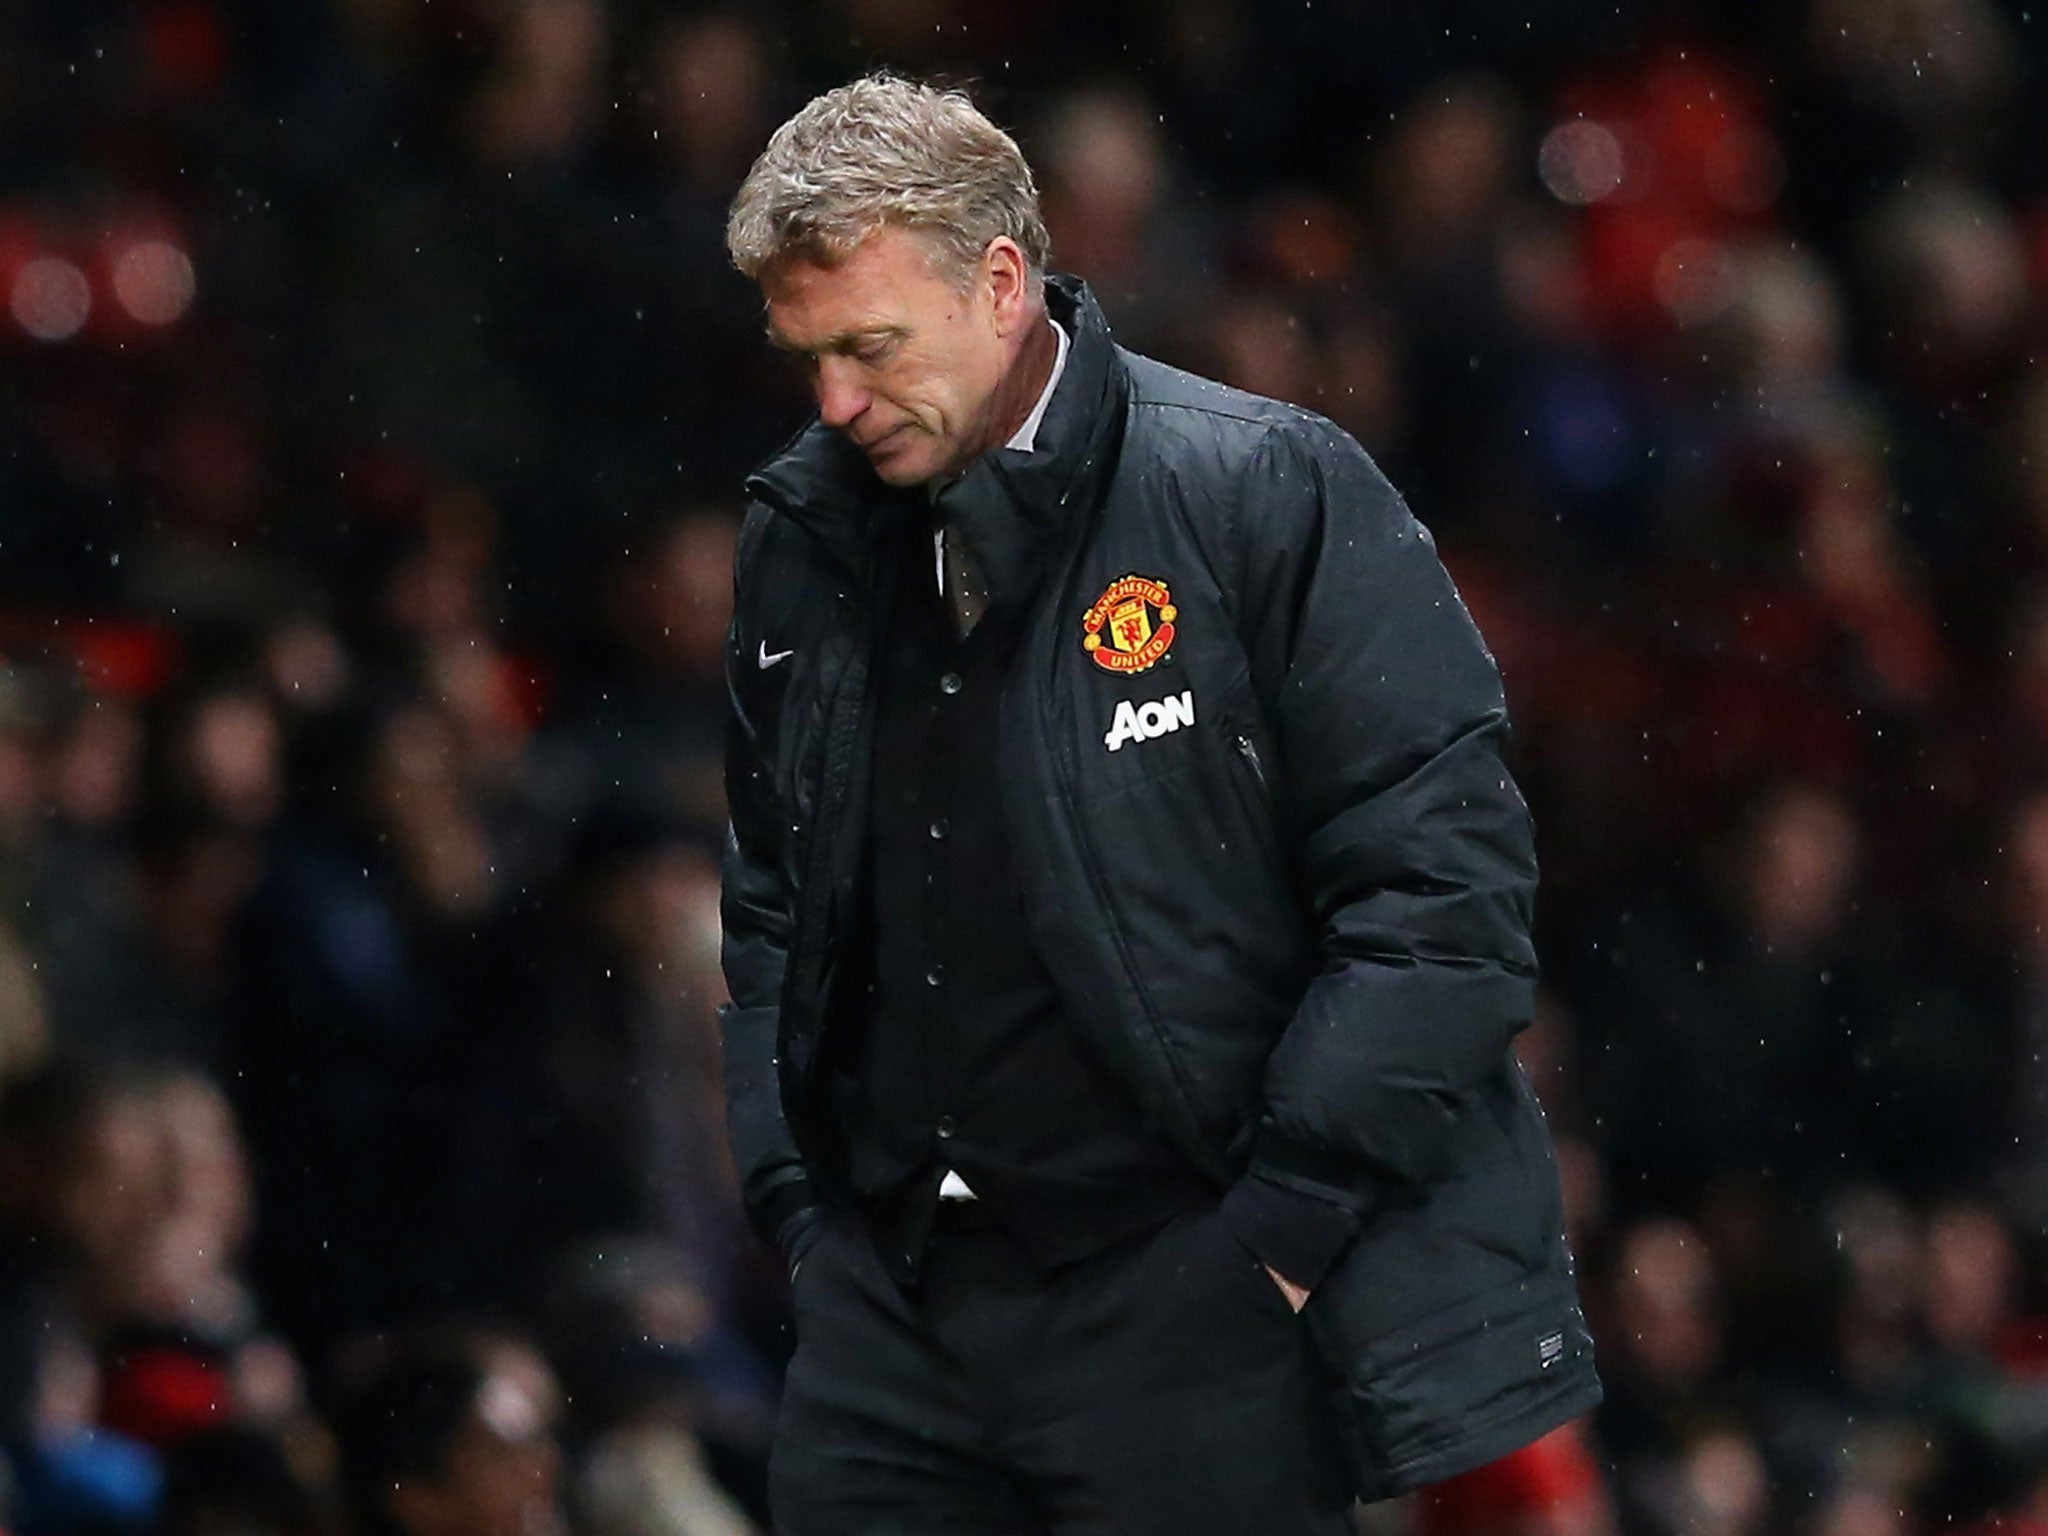 Manchester United manager David Moyes looks on in downbeat fashion during his club's 2-1 defeat by Swansea